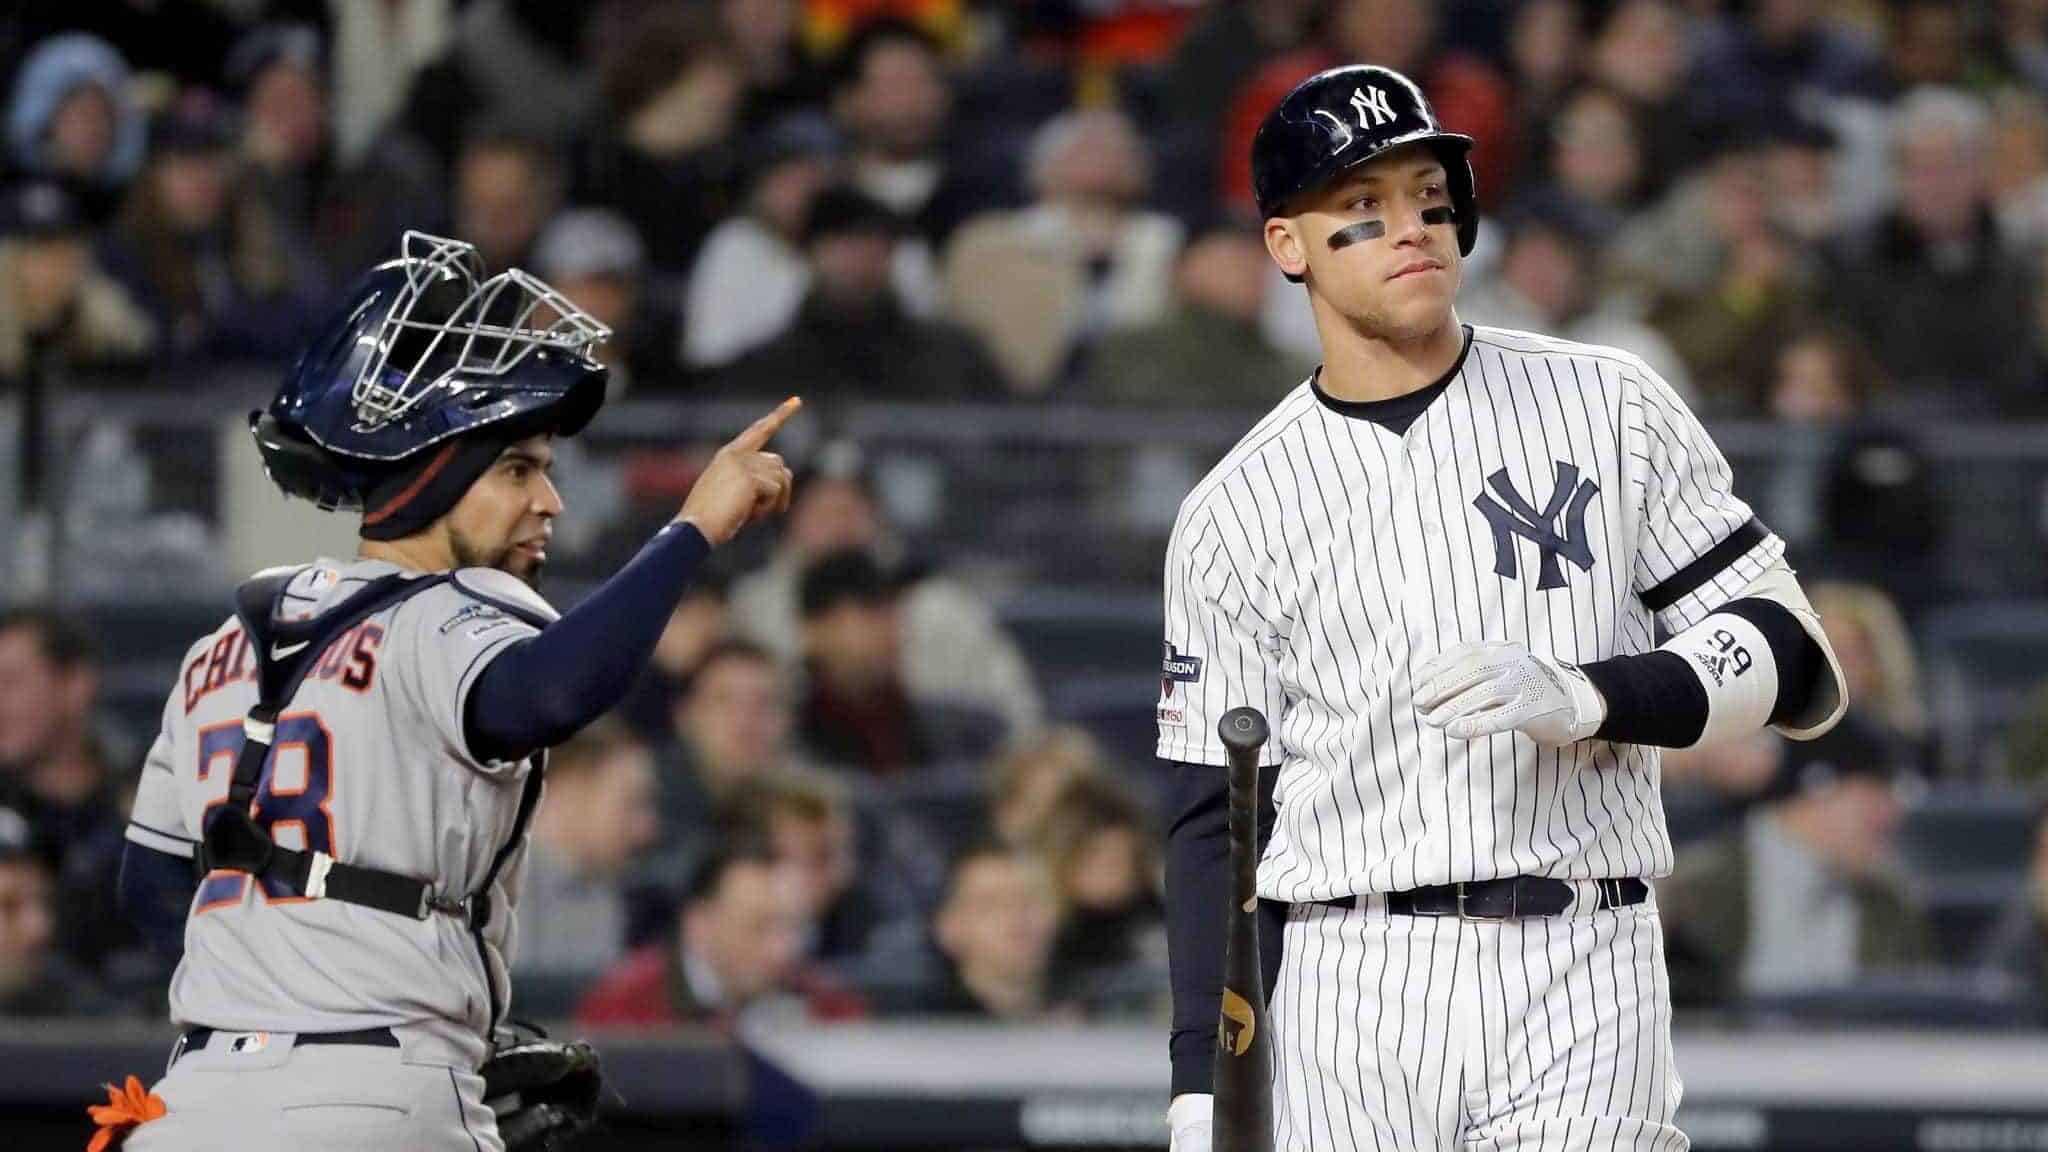 NEW YORK, NEW YORK - OCTOBER 18: Aaron Judge #99 of the New York Yankees reacts after being struck out by Justin Verlander #35 of the Houston Astros during the fifth inning in game five of the American League Championship Series at Yankee Stadium on October 18, 2019 in New York City.